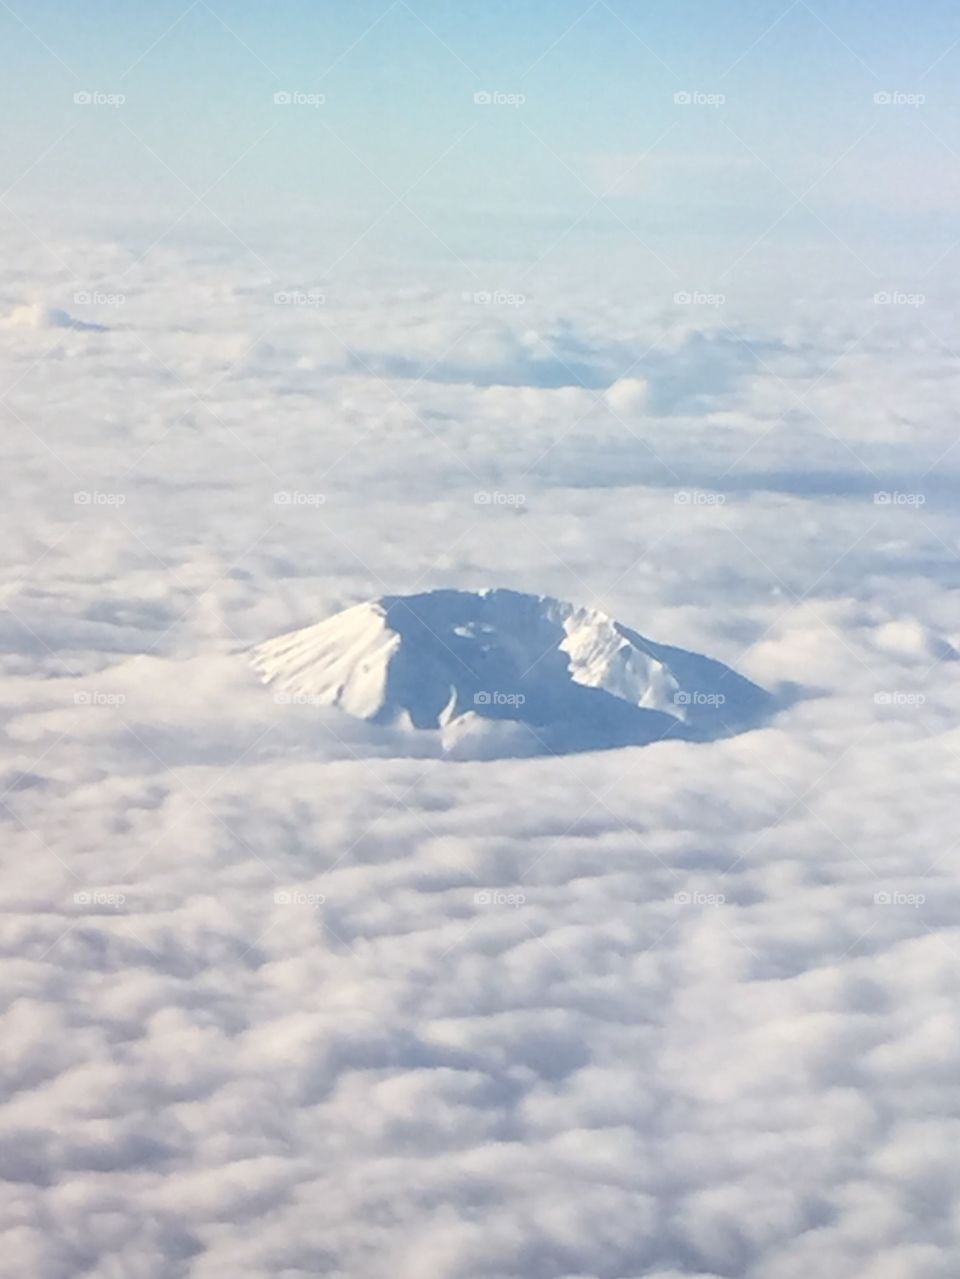 Mt. St. Helens from the air in January 2016